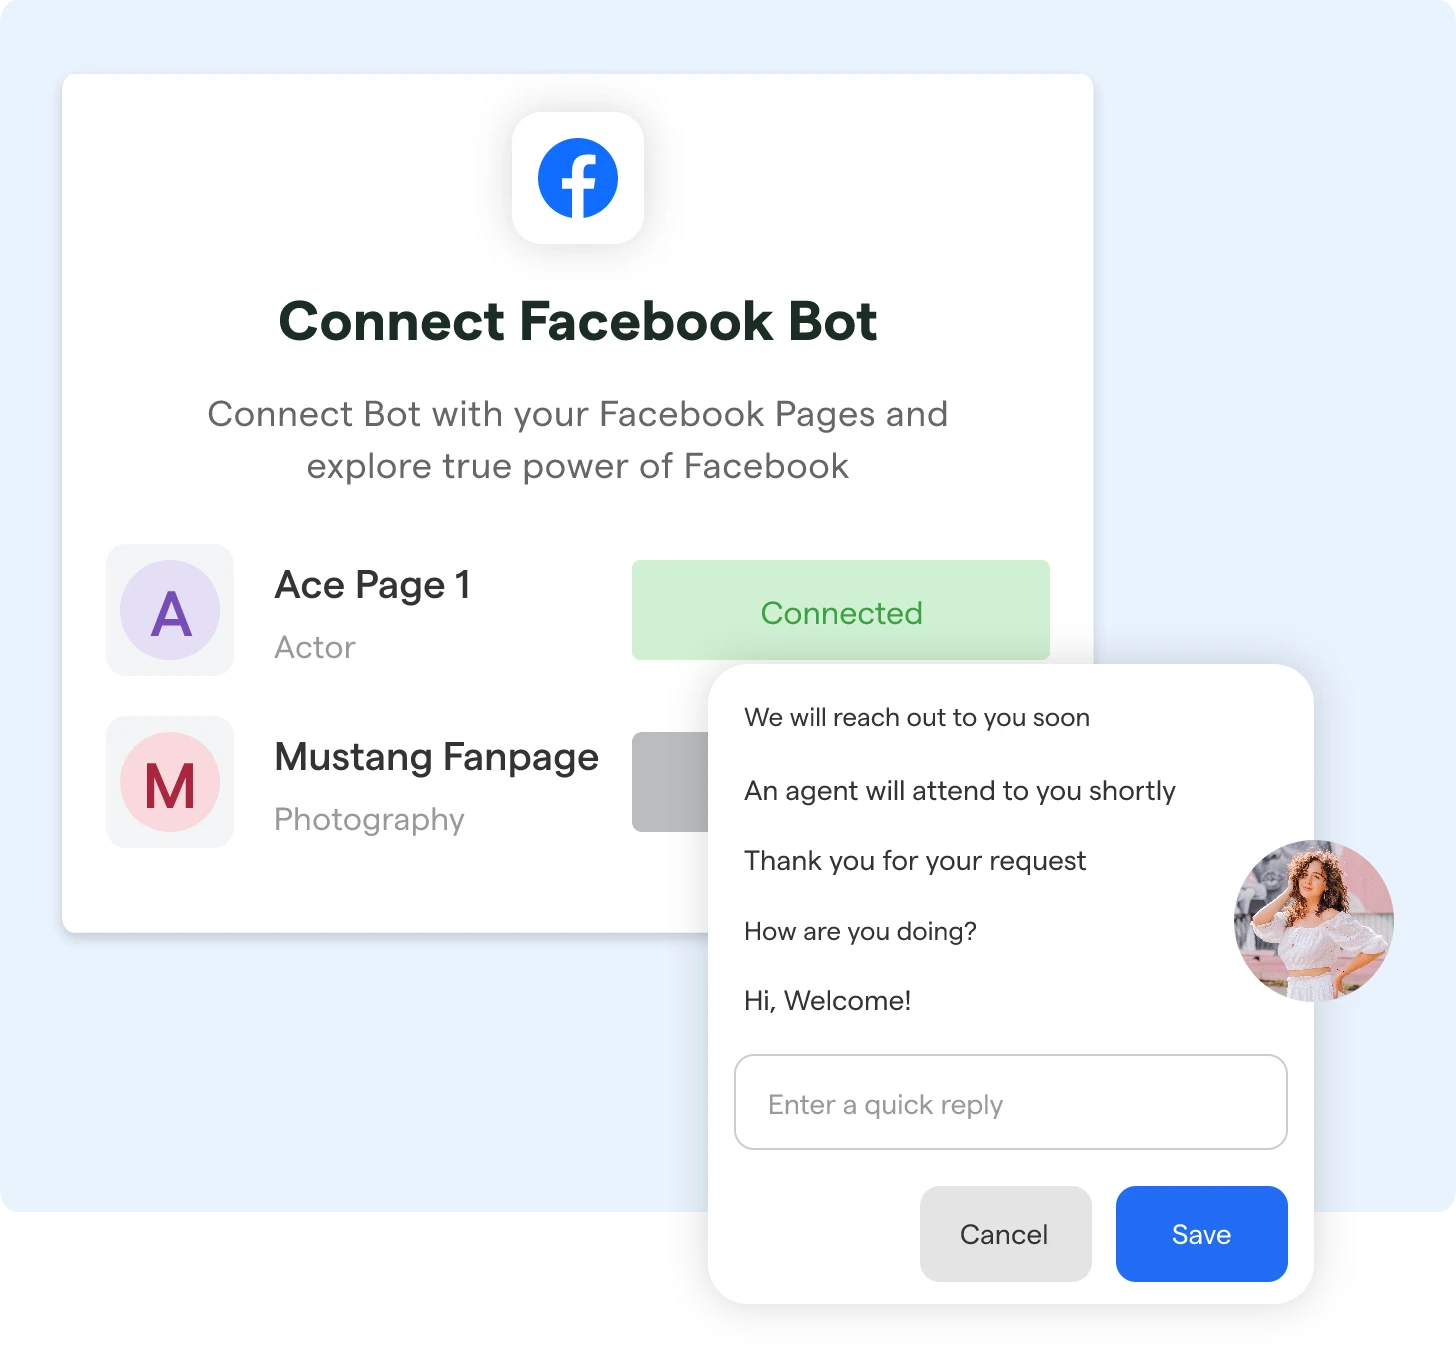 Connecting the Bot to Your Facebook Account